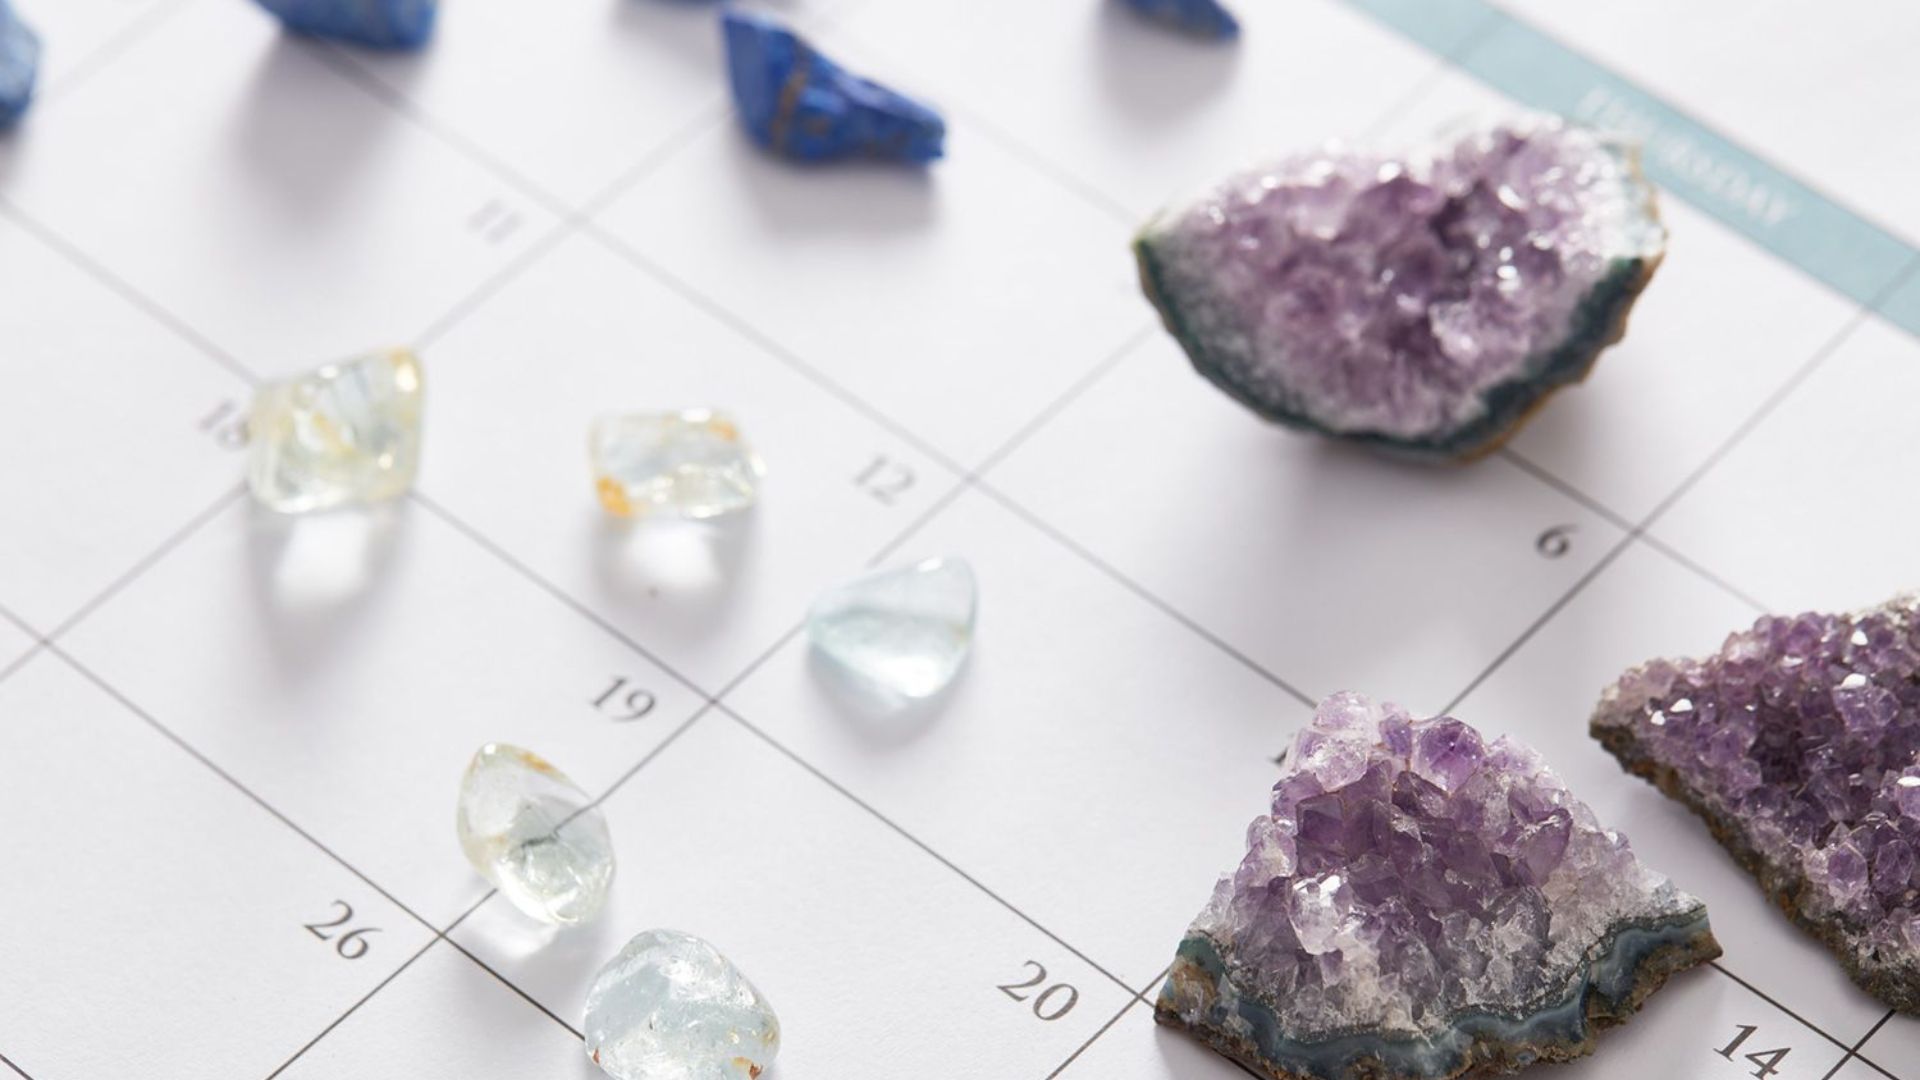 3 Different Color Of Stones On Calendar 